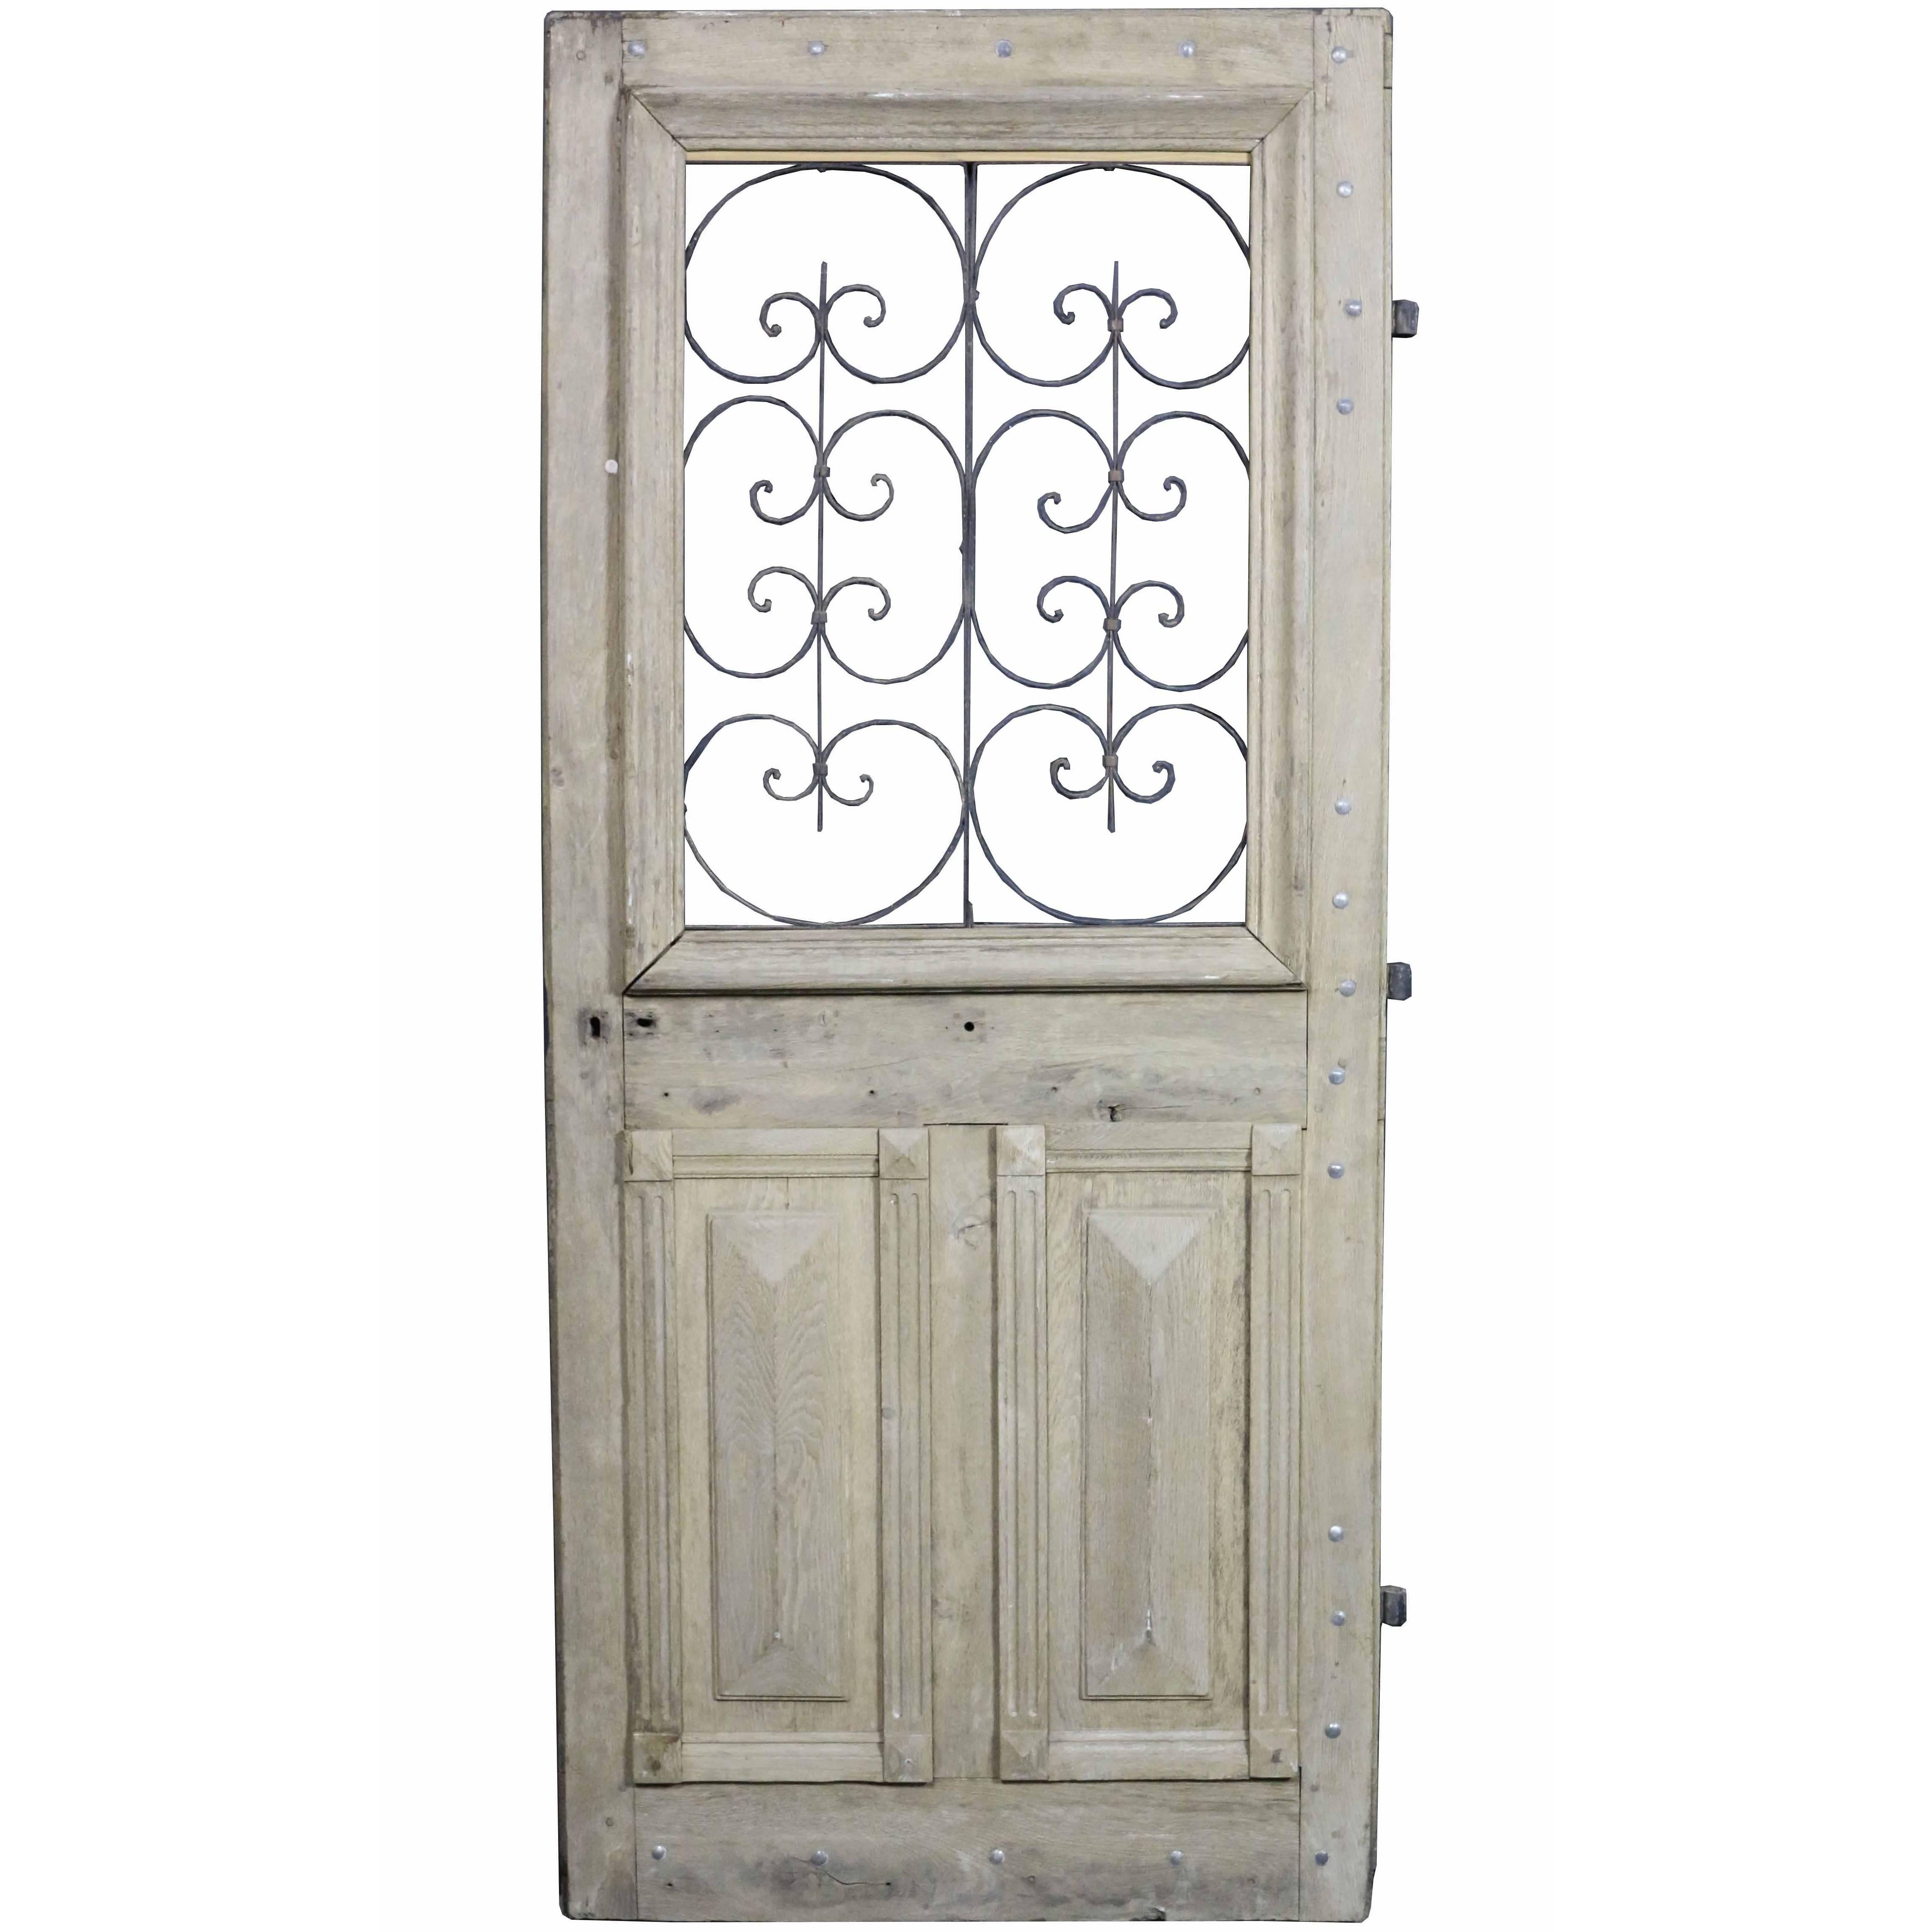 Antique French Oak Front Door with Iron Grills